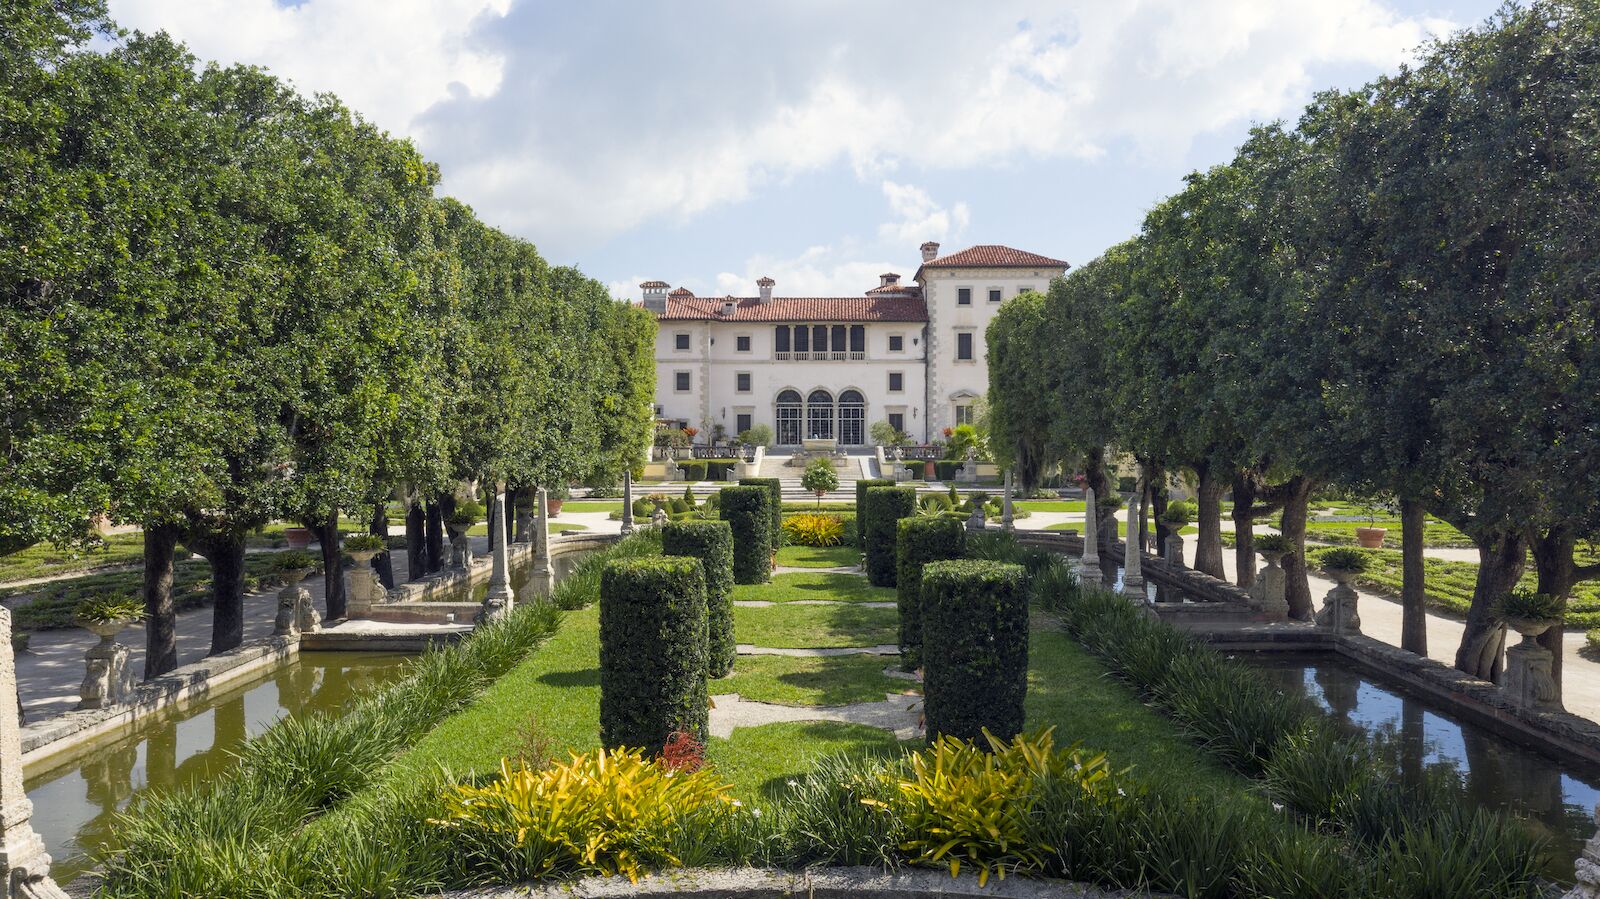 View of the main house at Vizcaya in Miami